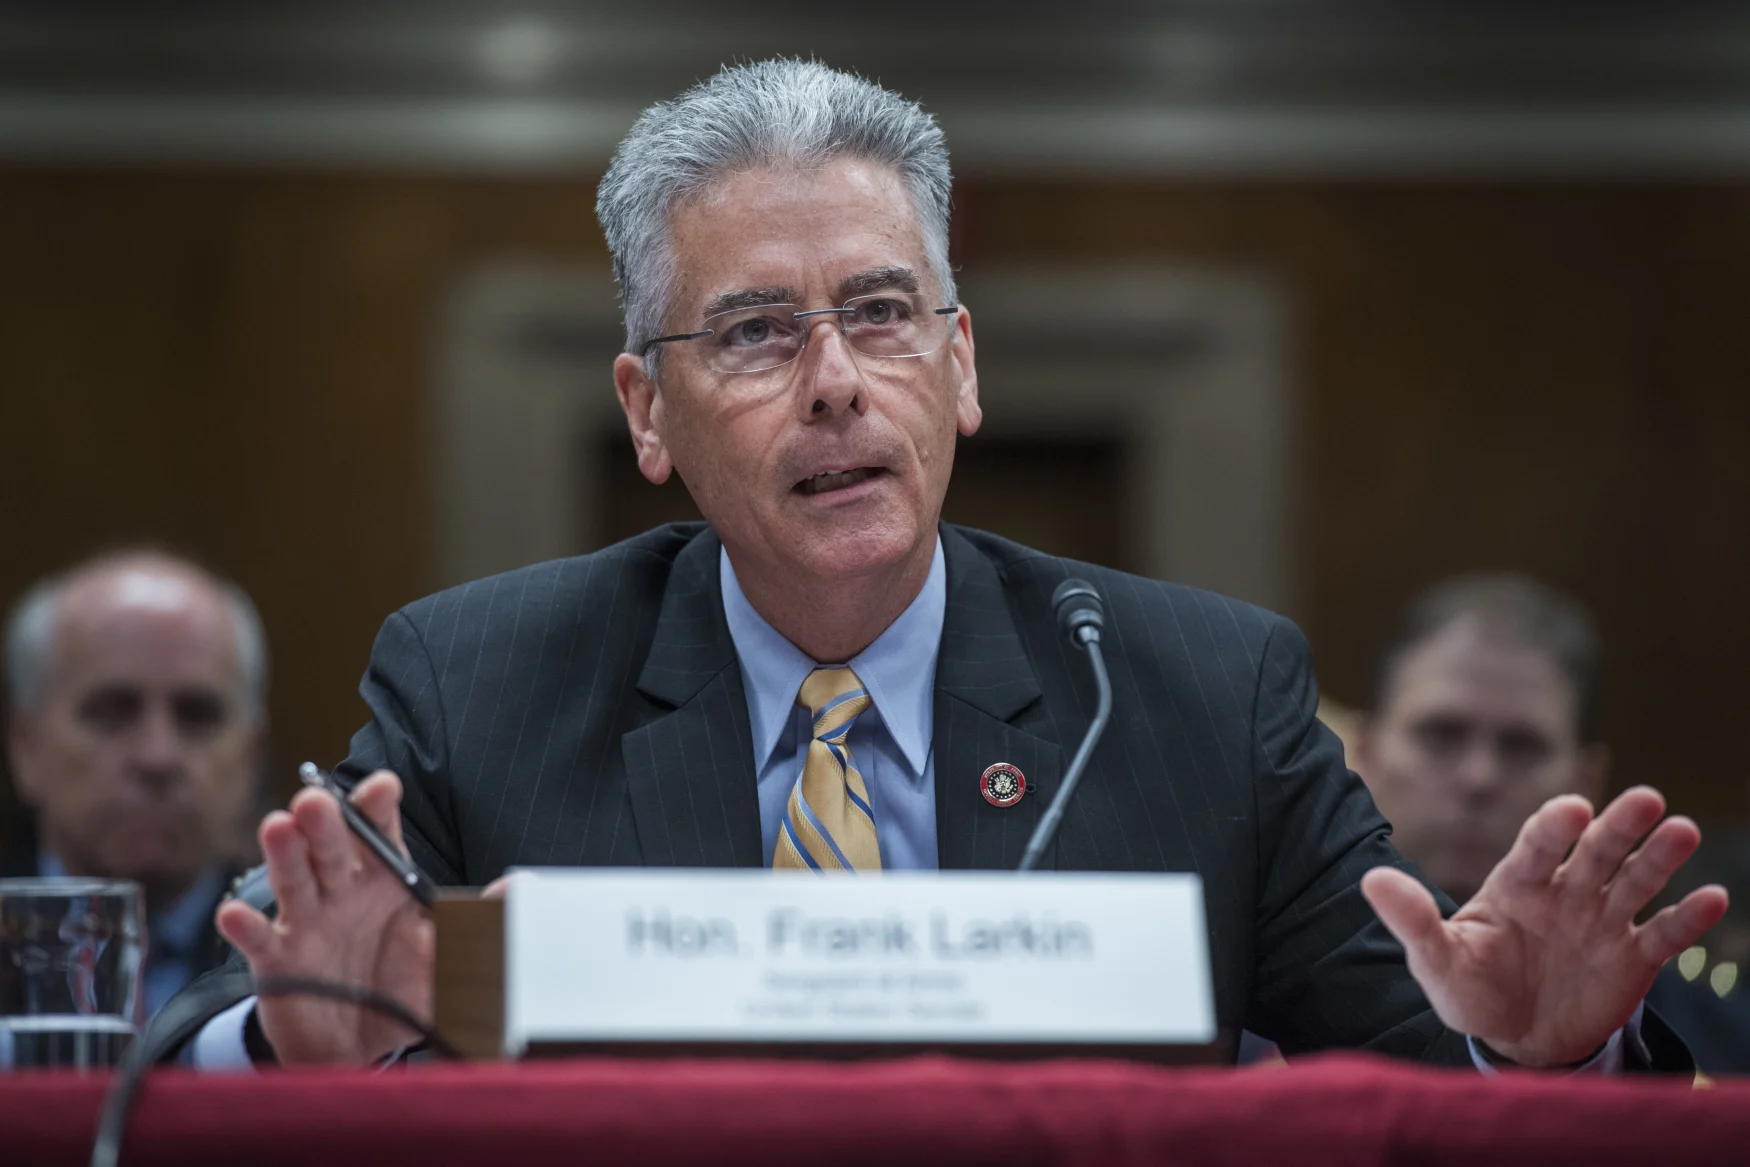 UNITED STATES - JUNE 29: Senate Sergeant at Arms Frank Larkin testifies before a Senate Appropriations Legislative Branch Subcommittee hearing in Dirksen Building on the proposed FY2018 budget for the Senate Sergeant at Arms and the U.S. Capitol Police on June 29, 2017.(Photo By Tom Williams/CQ Roll Call)